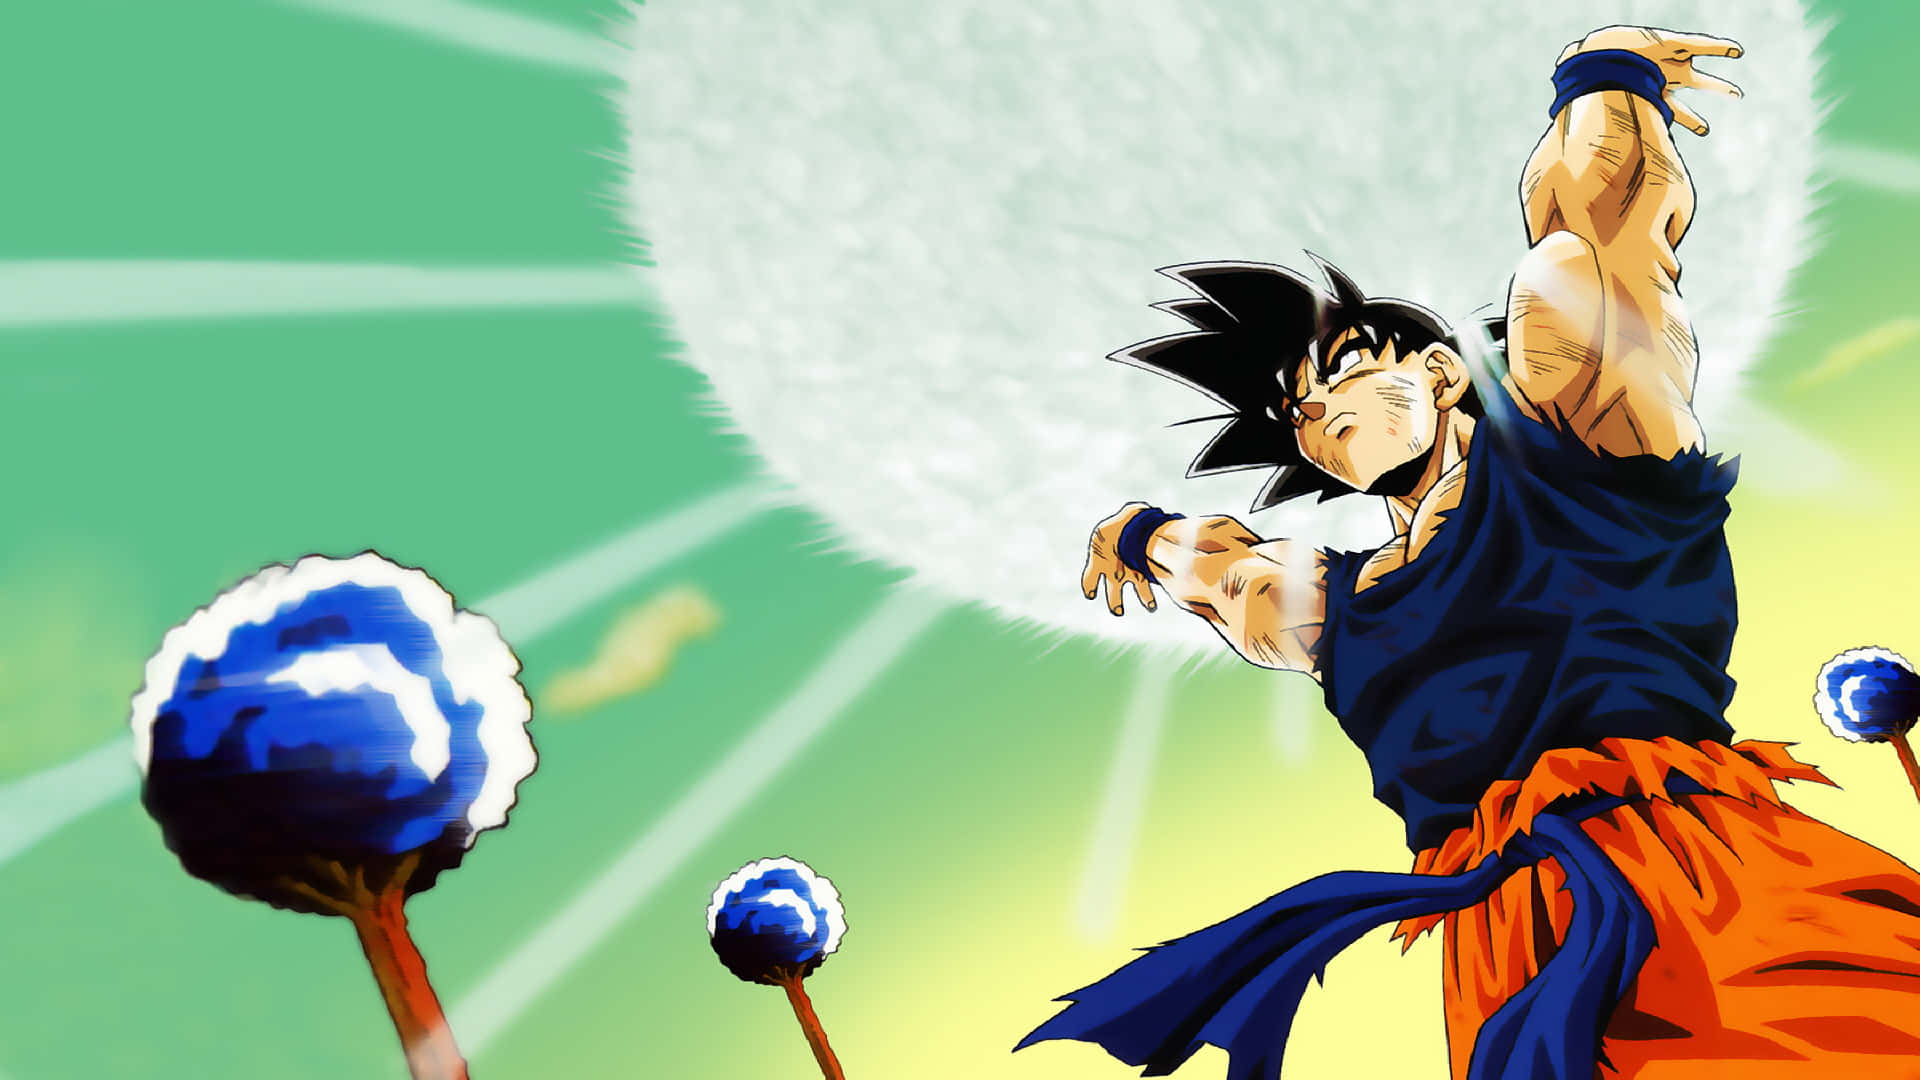 Unlock your power with a new Dragon Ball Z wallpaper